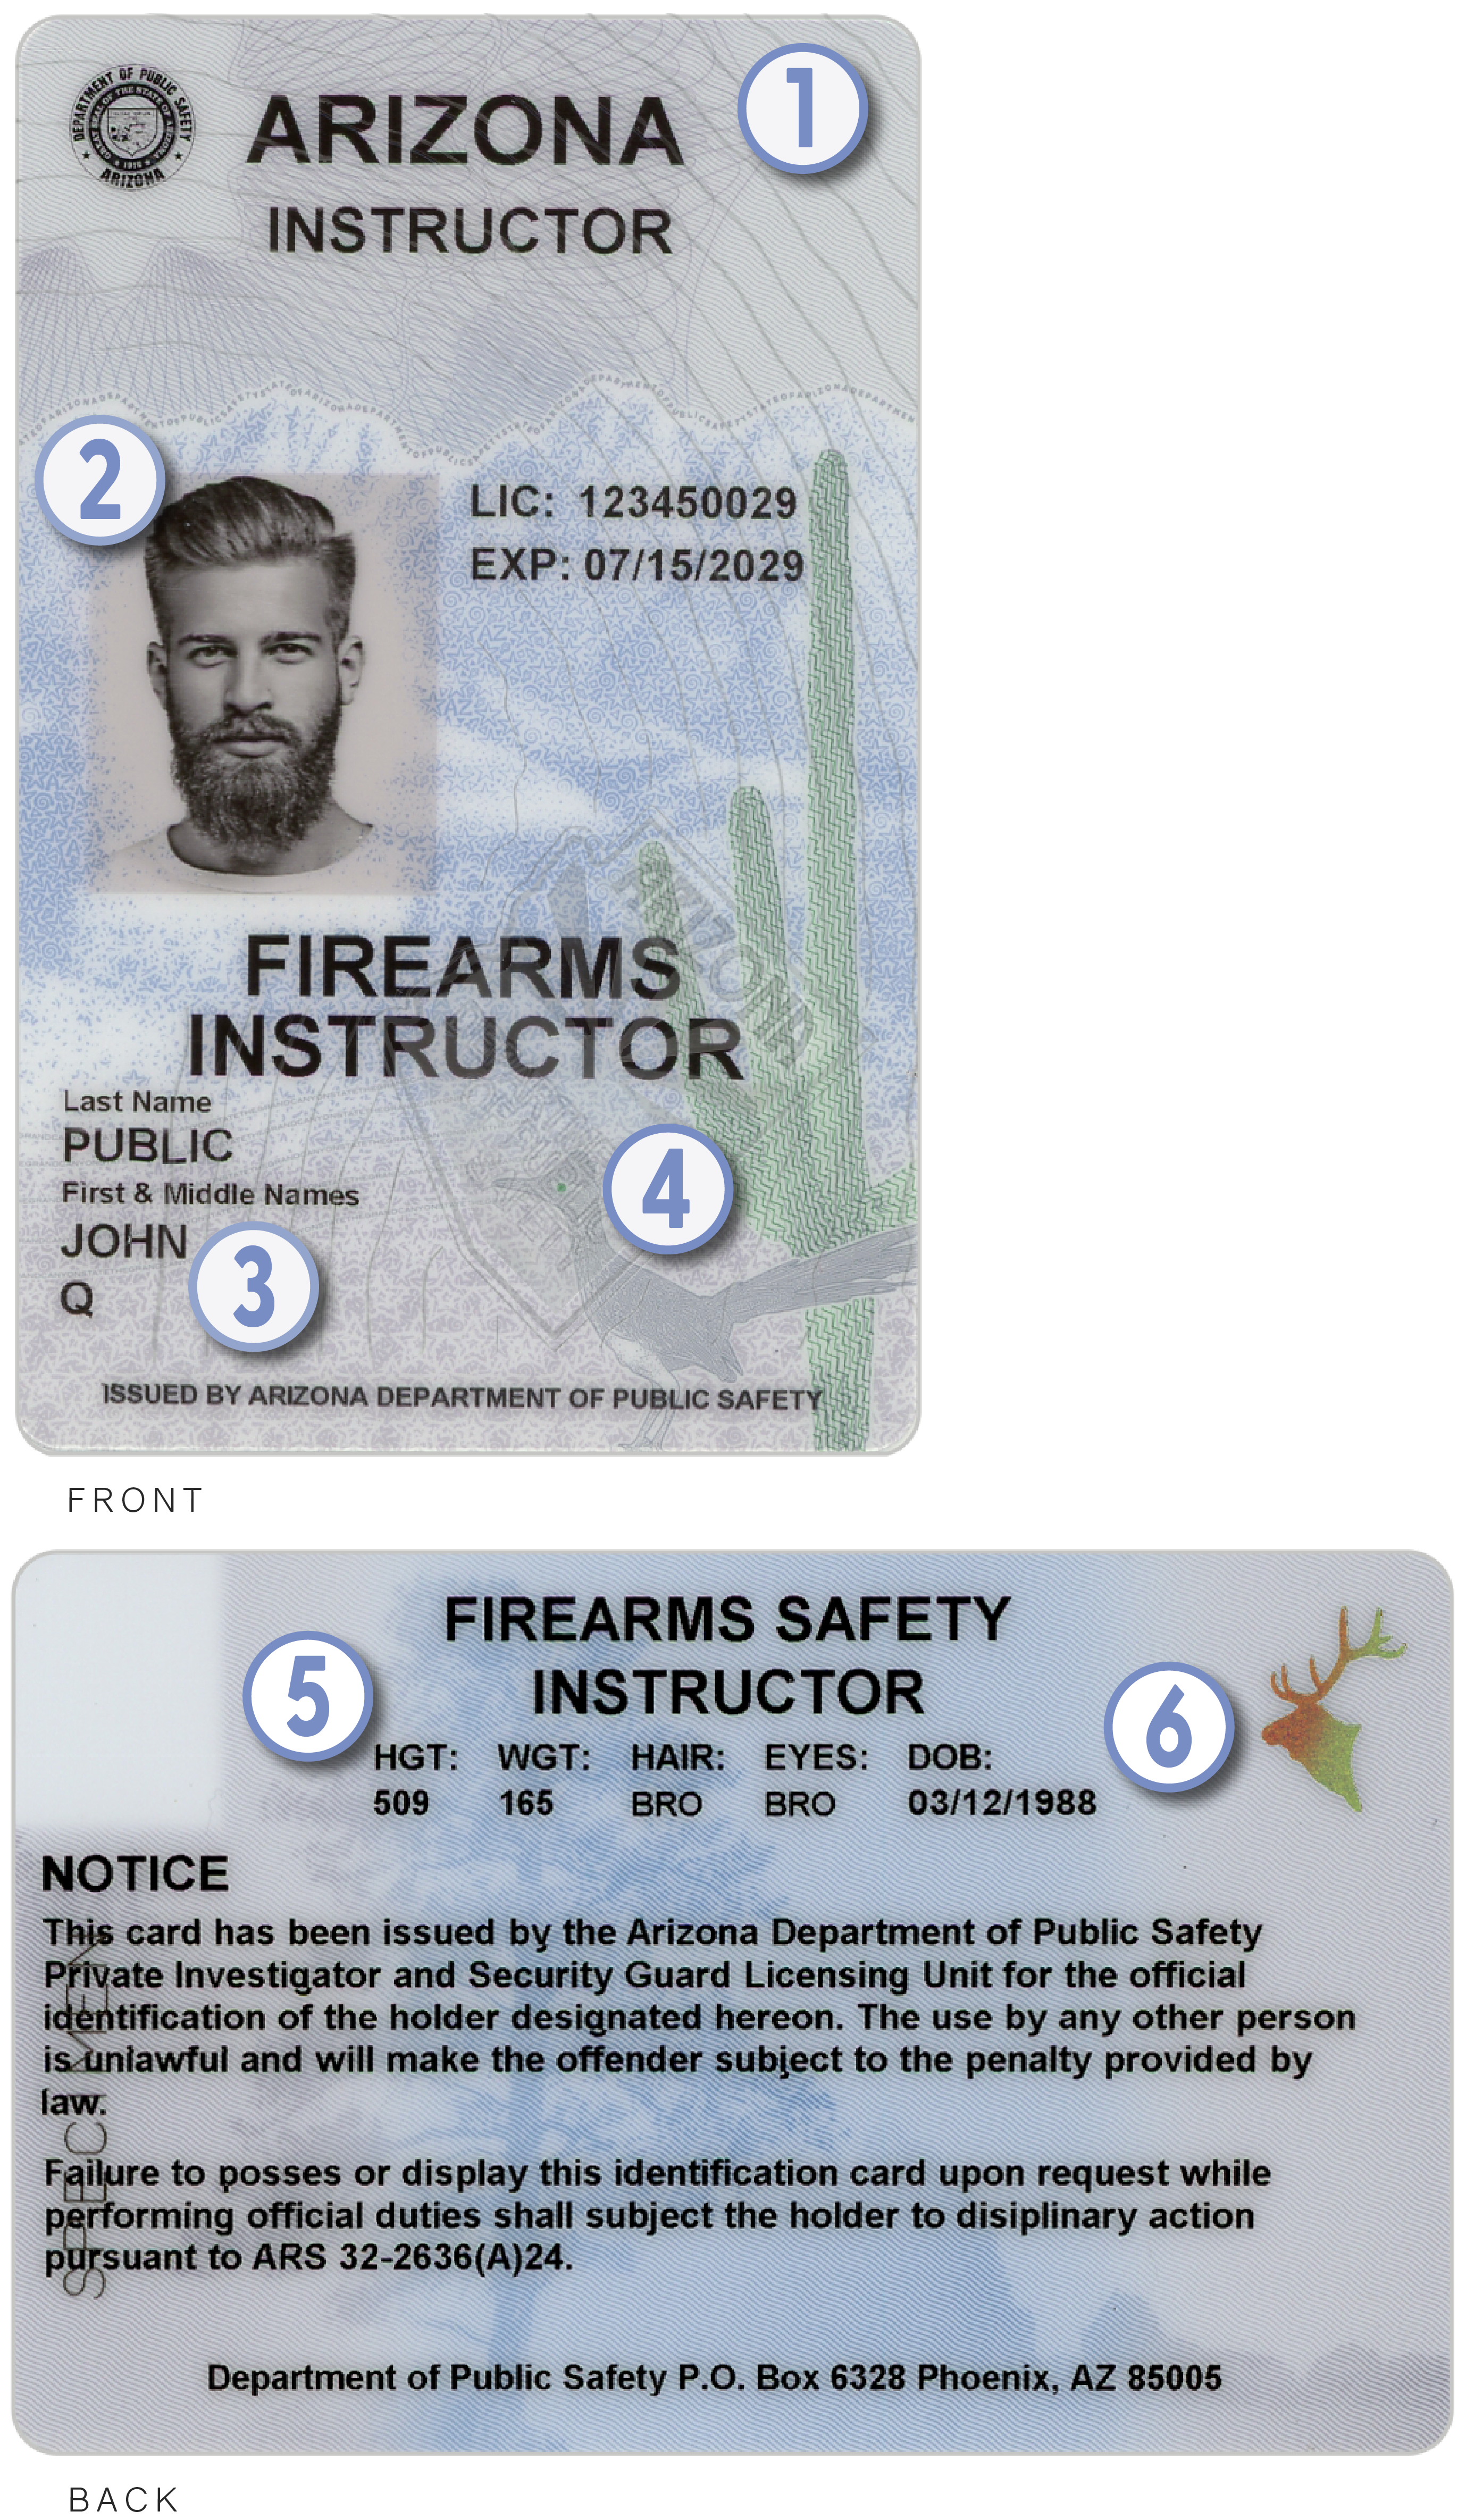 New Firearms Instructor Card